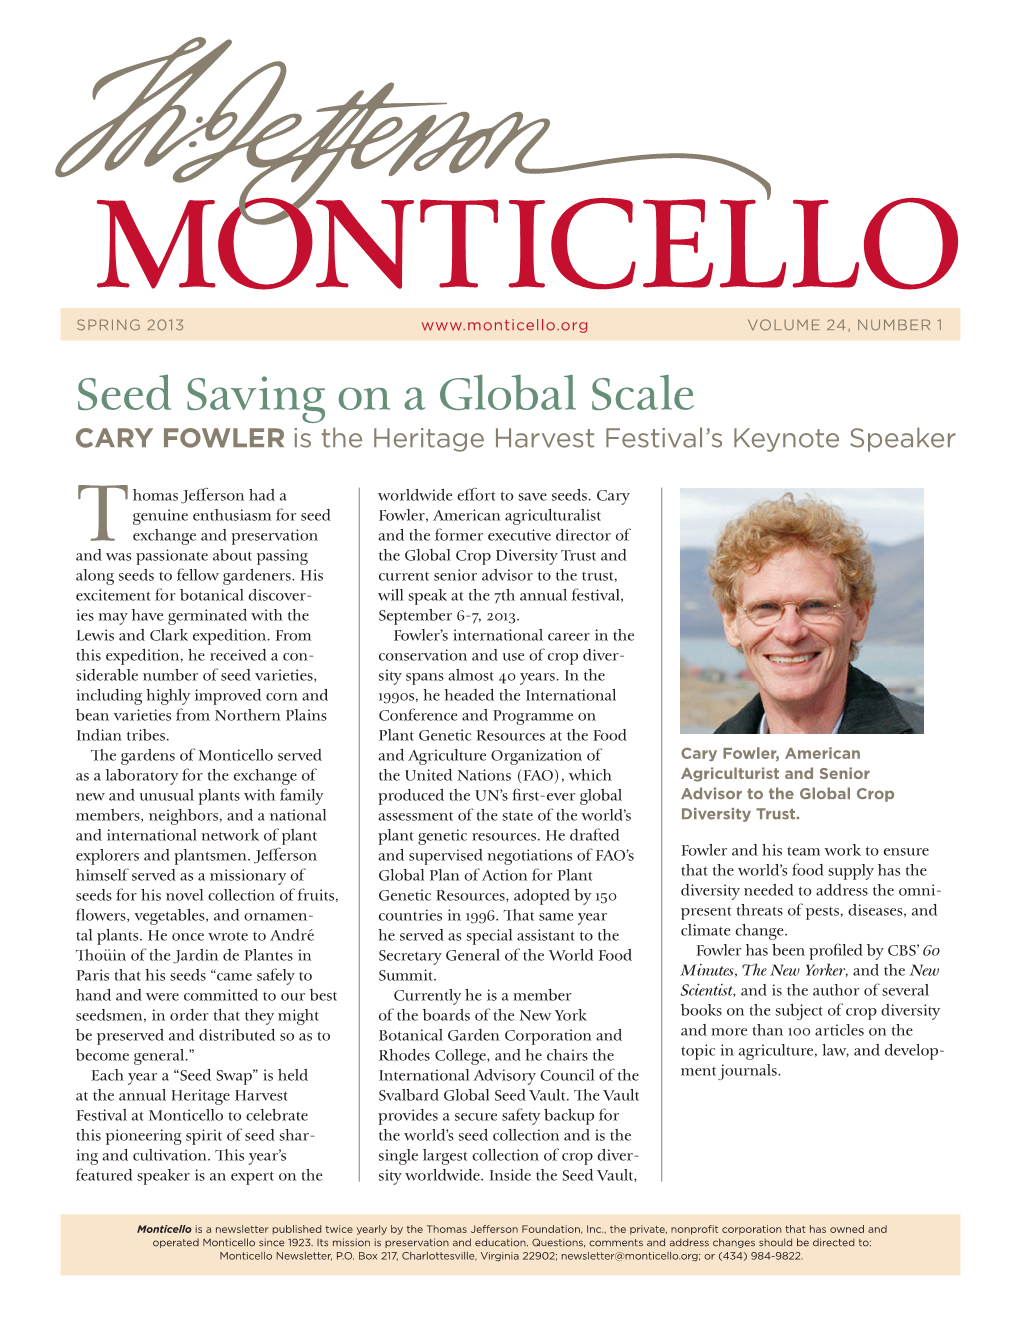 Seed Saving on a Global Scale: Cary Fowler Is the Heritage Harvest Festival's Keynote Speaker